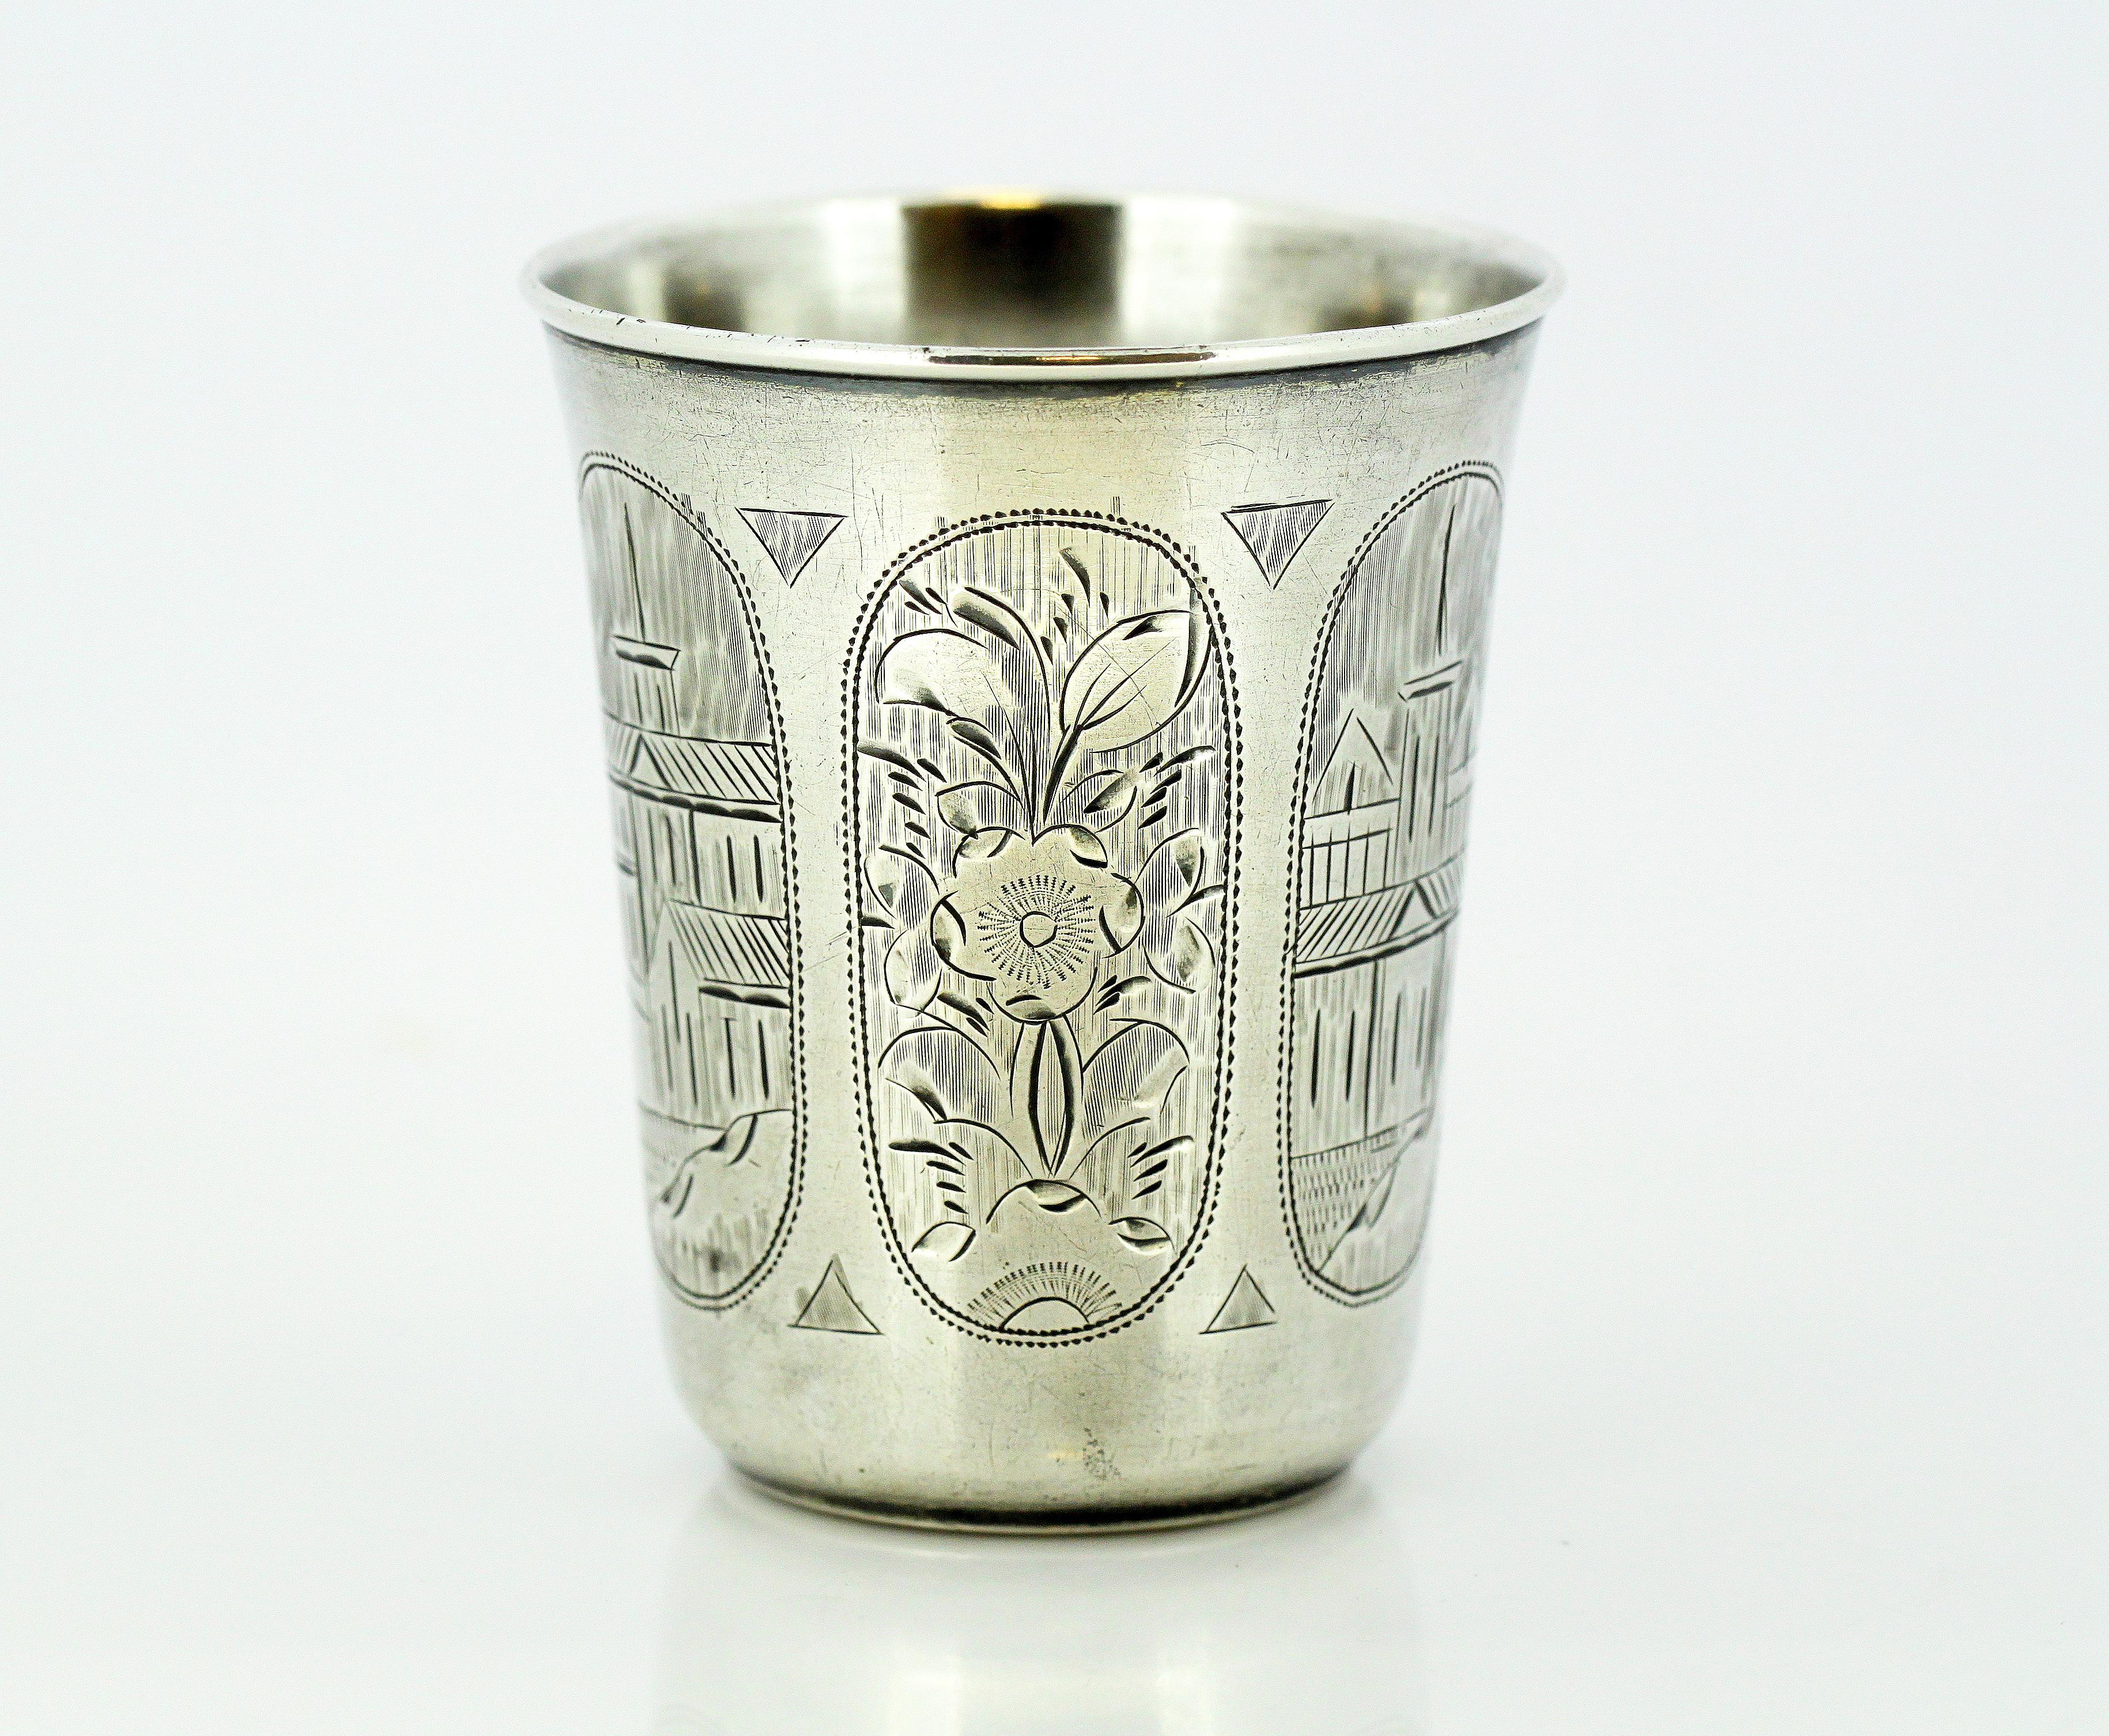 A fine and impressive antique Russian silver Kiddush cup.

The surface of the silver beaker is embellished with fine and impressive engraved decoration depicting a simplified archway revealing alternating leaf motif and city scenes.

Maker: ???